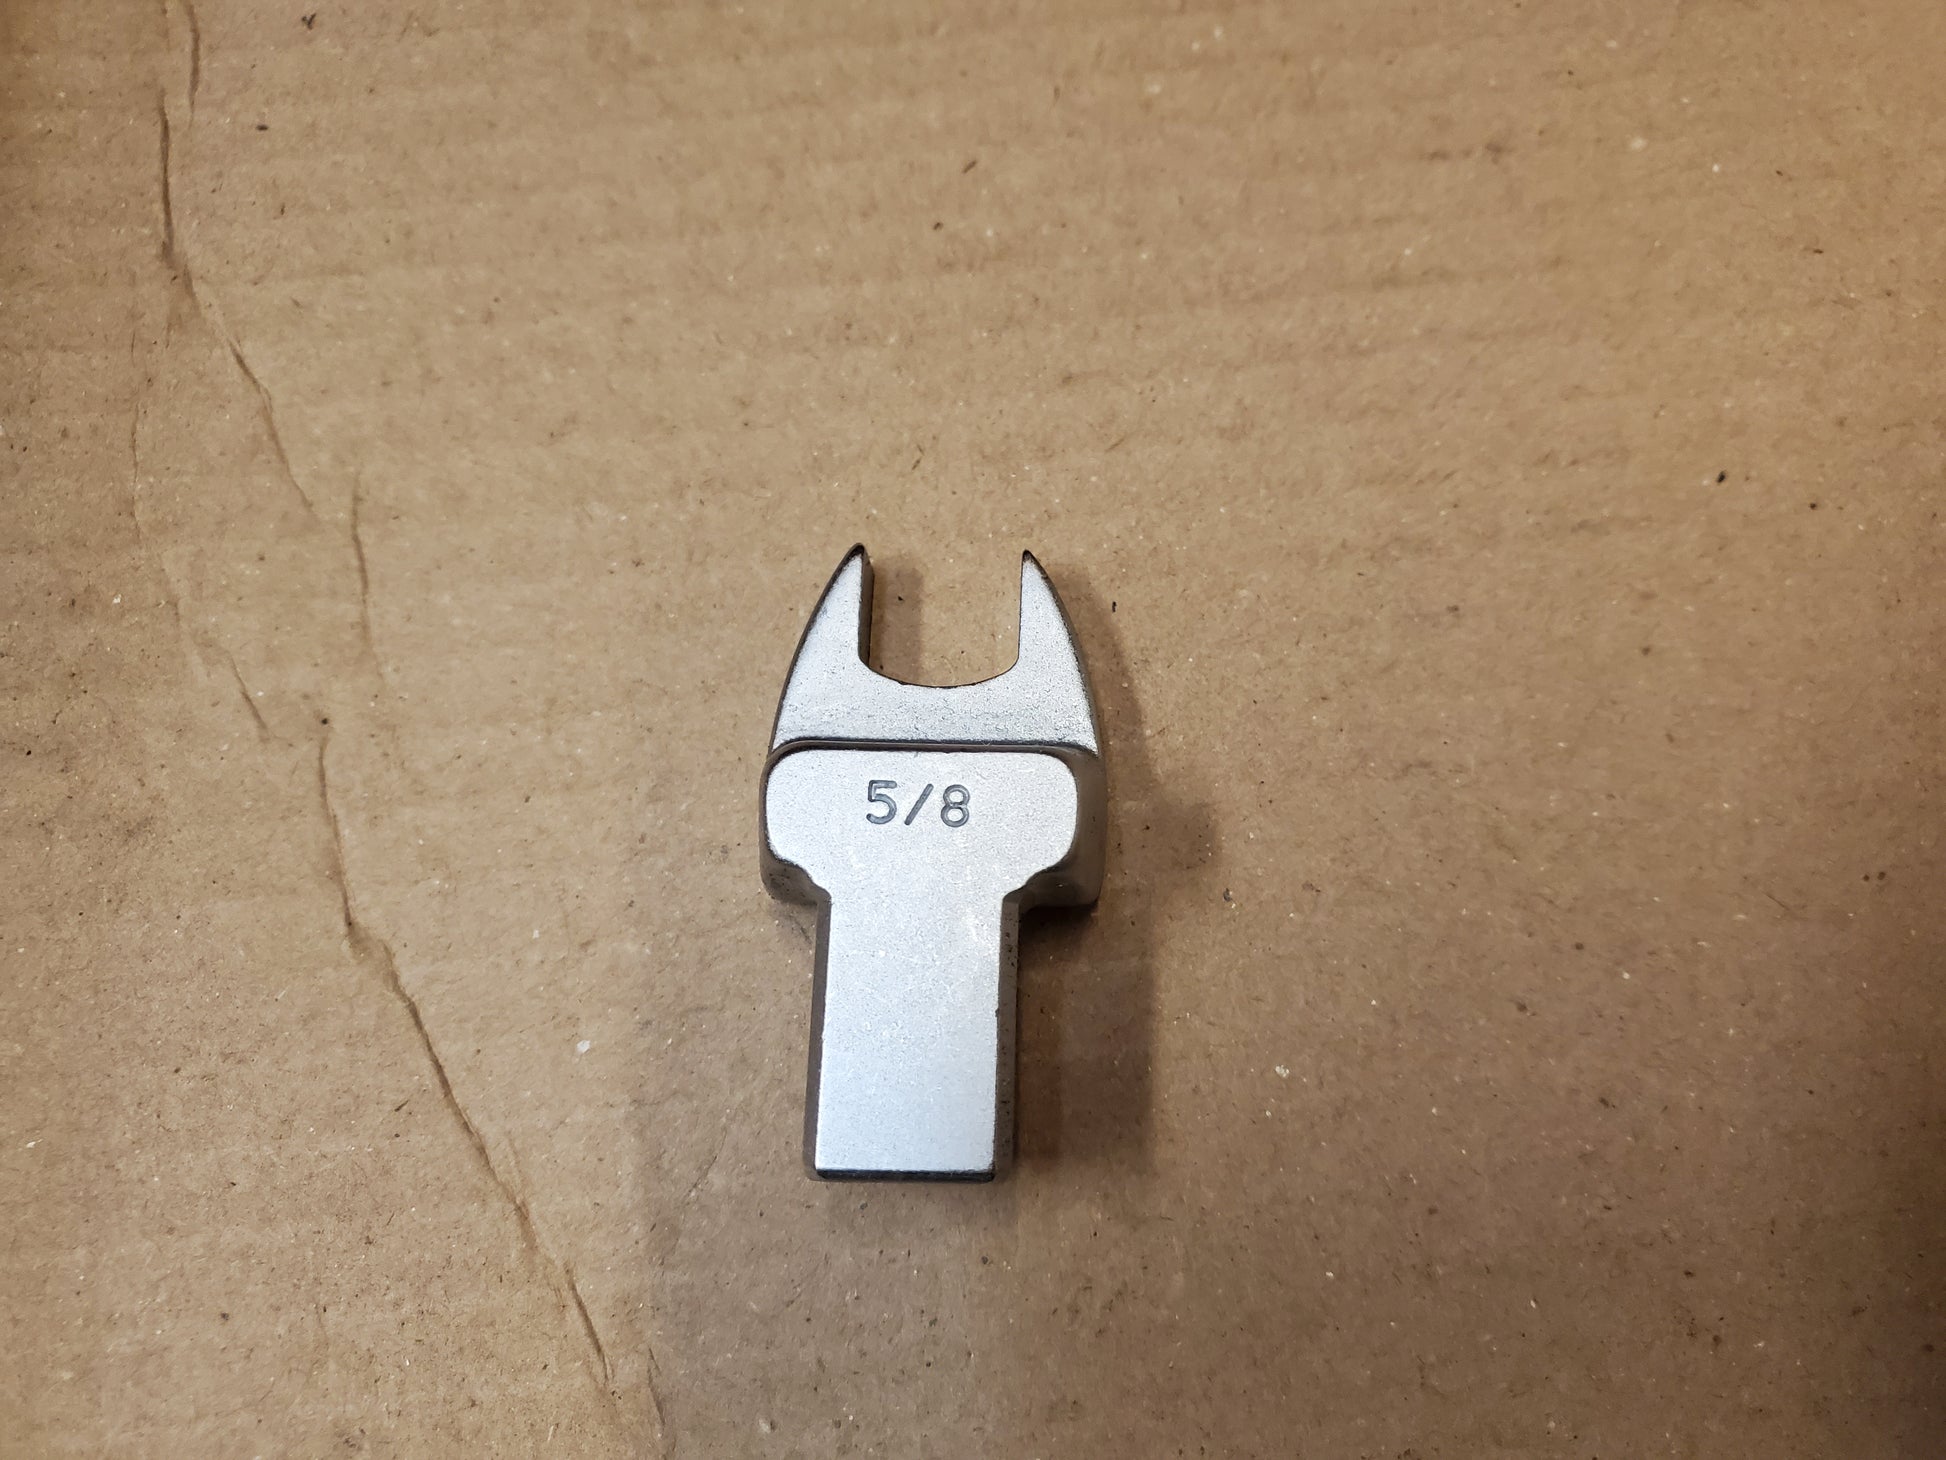 5/8" AE IMPERIAL WRENCH HEAD